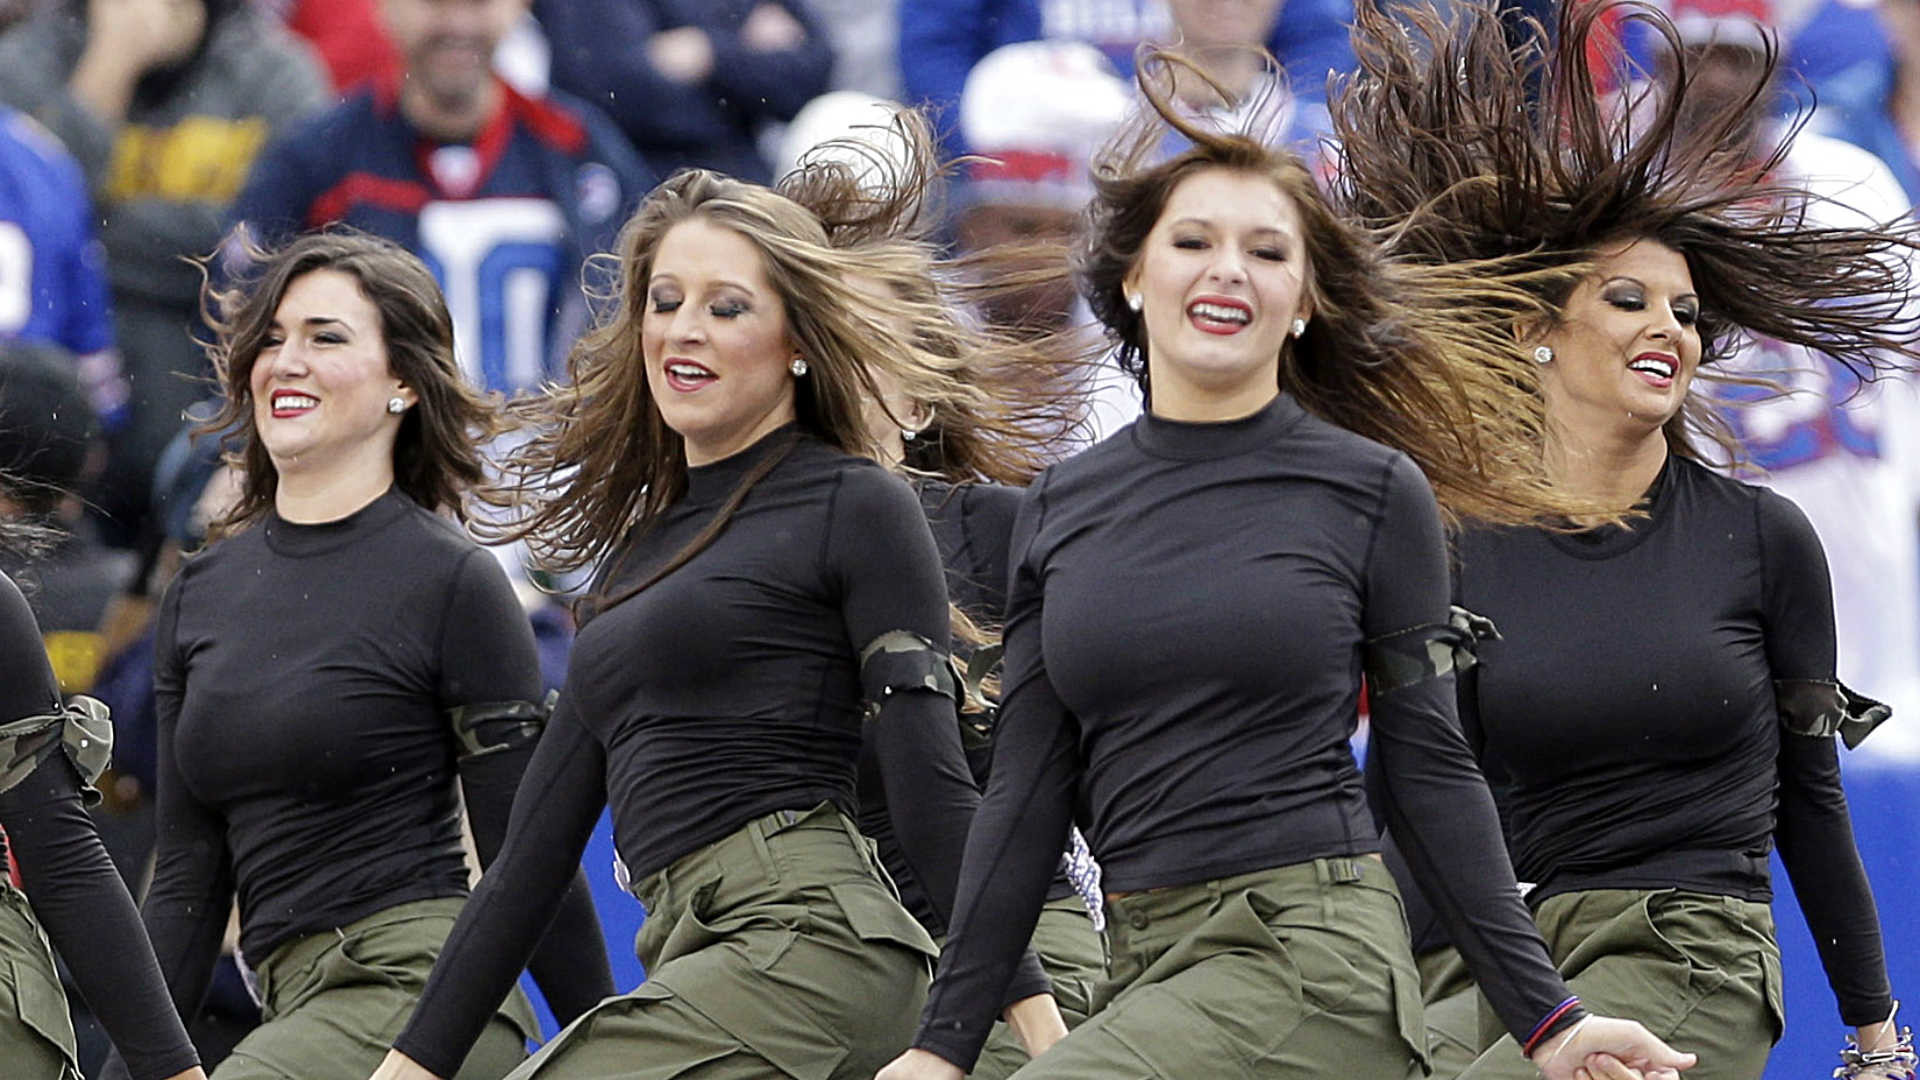 1920x1080 NFL cheerleaders bring in money, but barely paid any